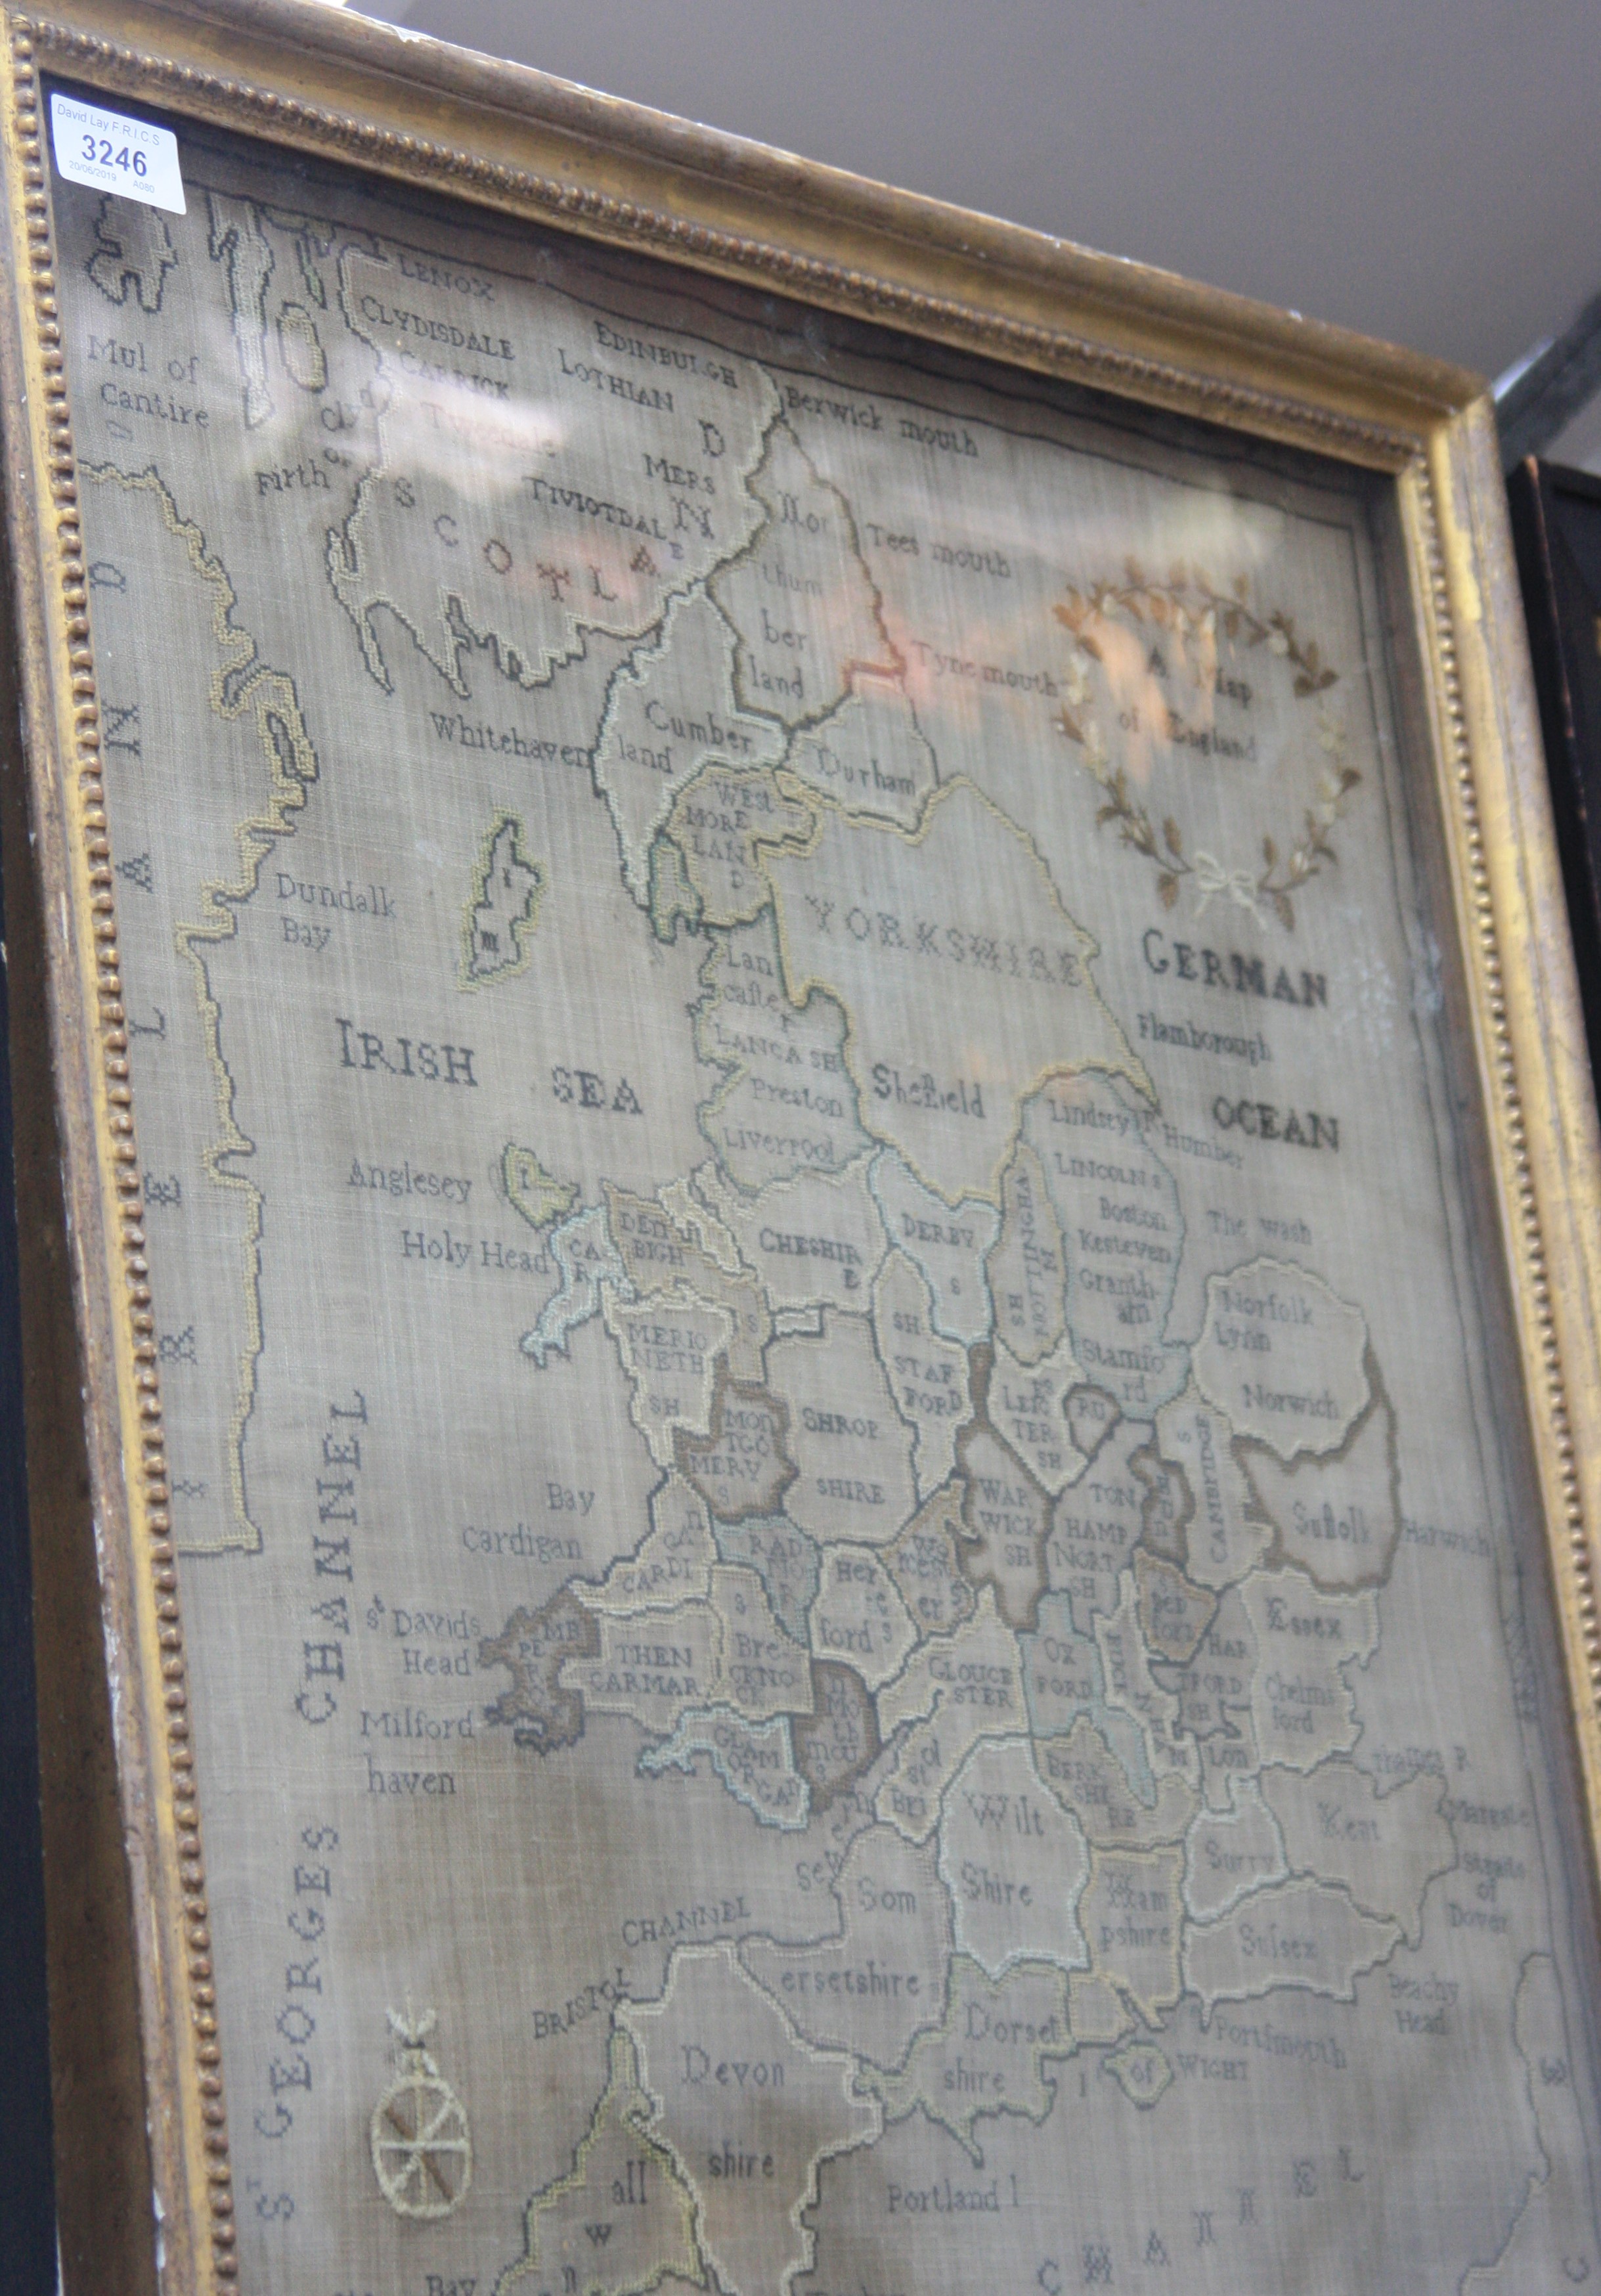 A silkwork map of England, early 19th century, the counties named, 58 x 51cm, gilt framed.